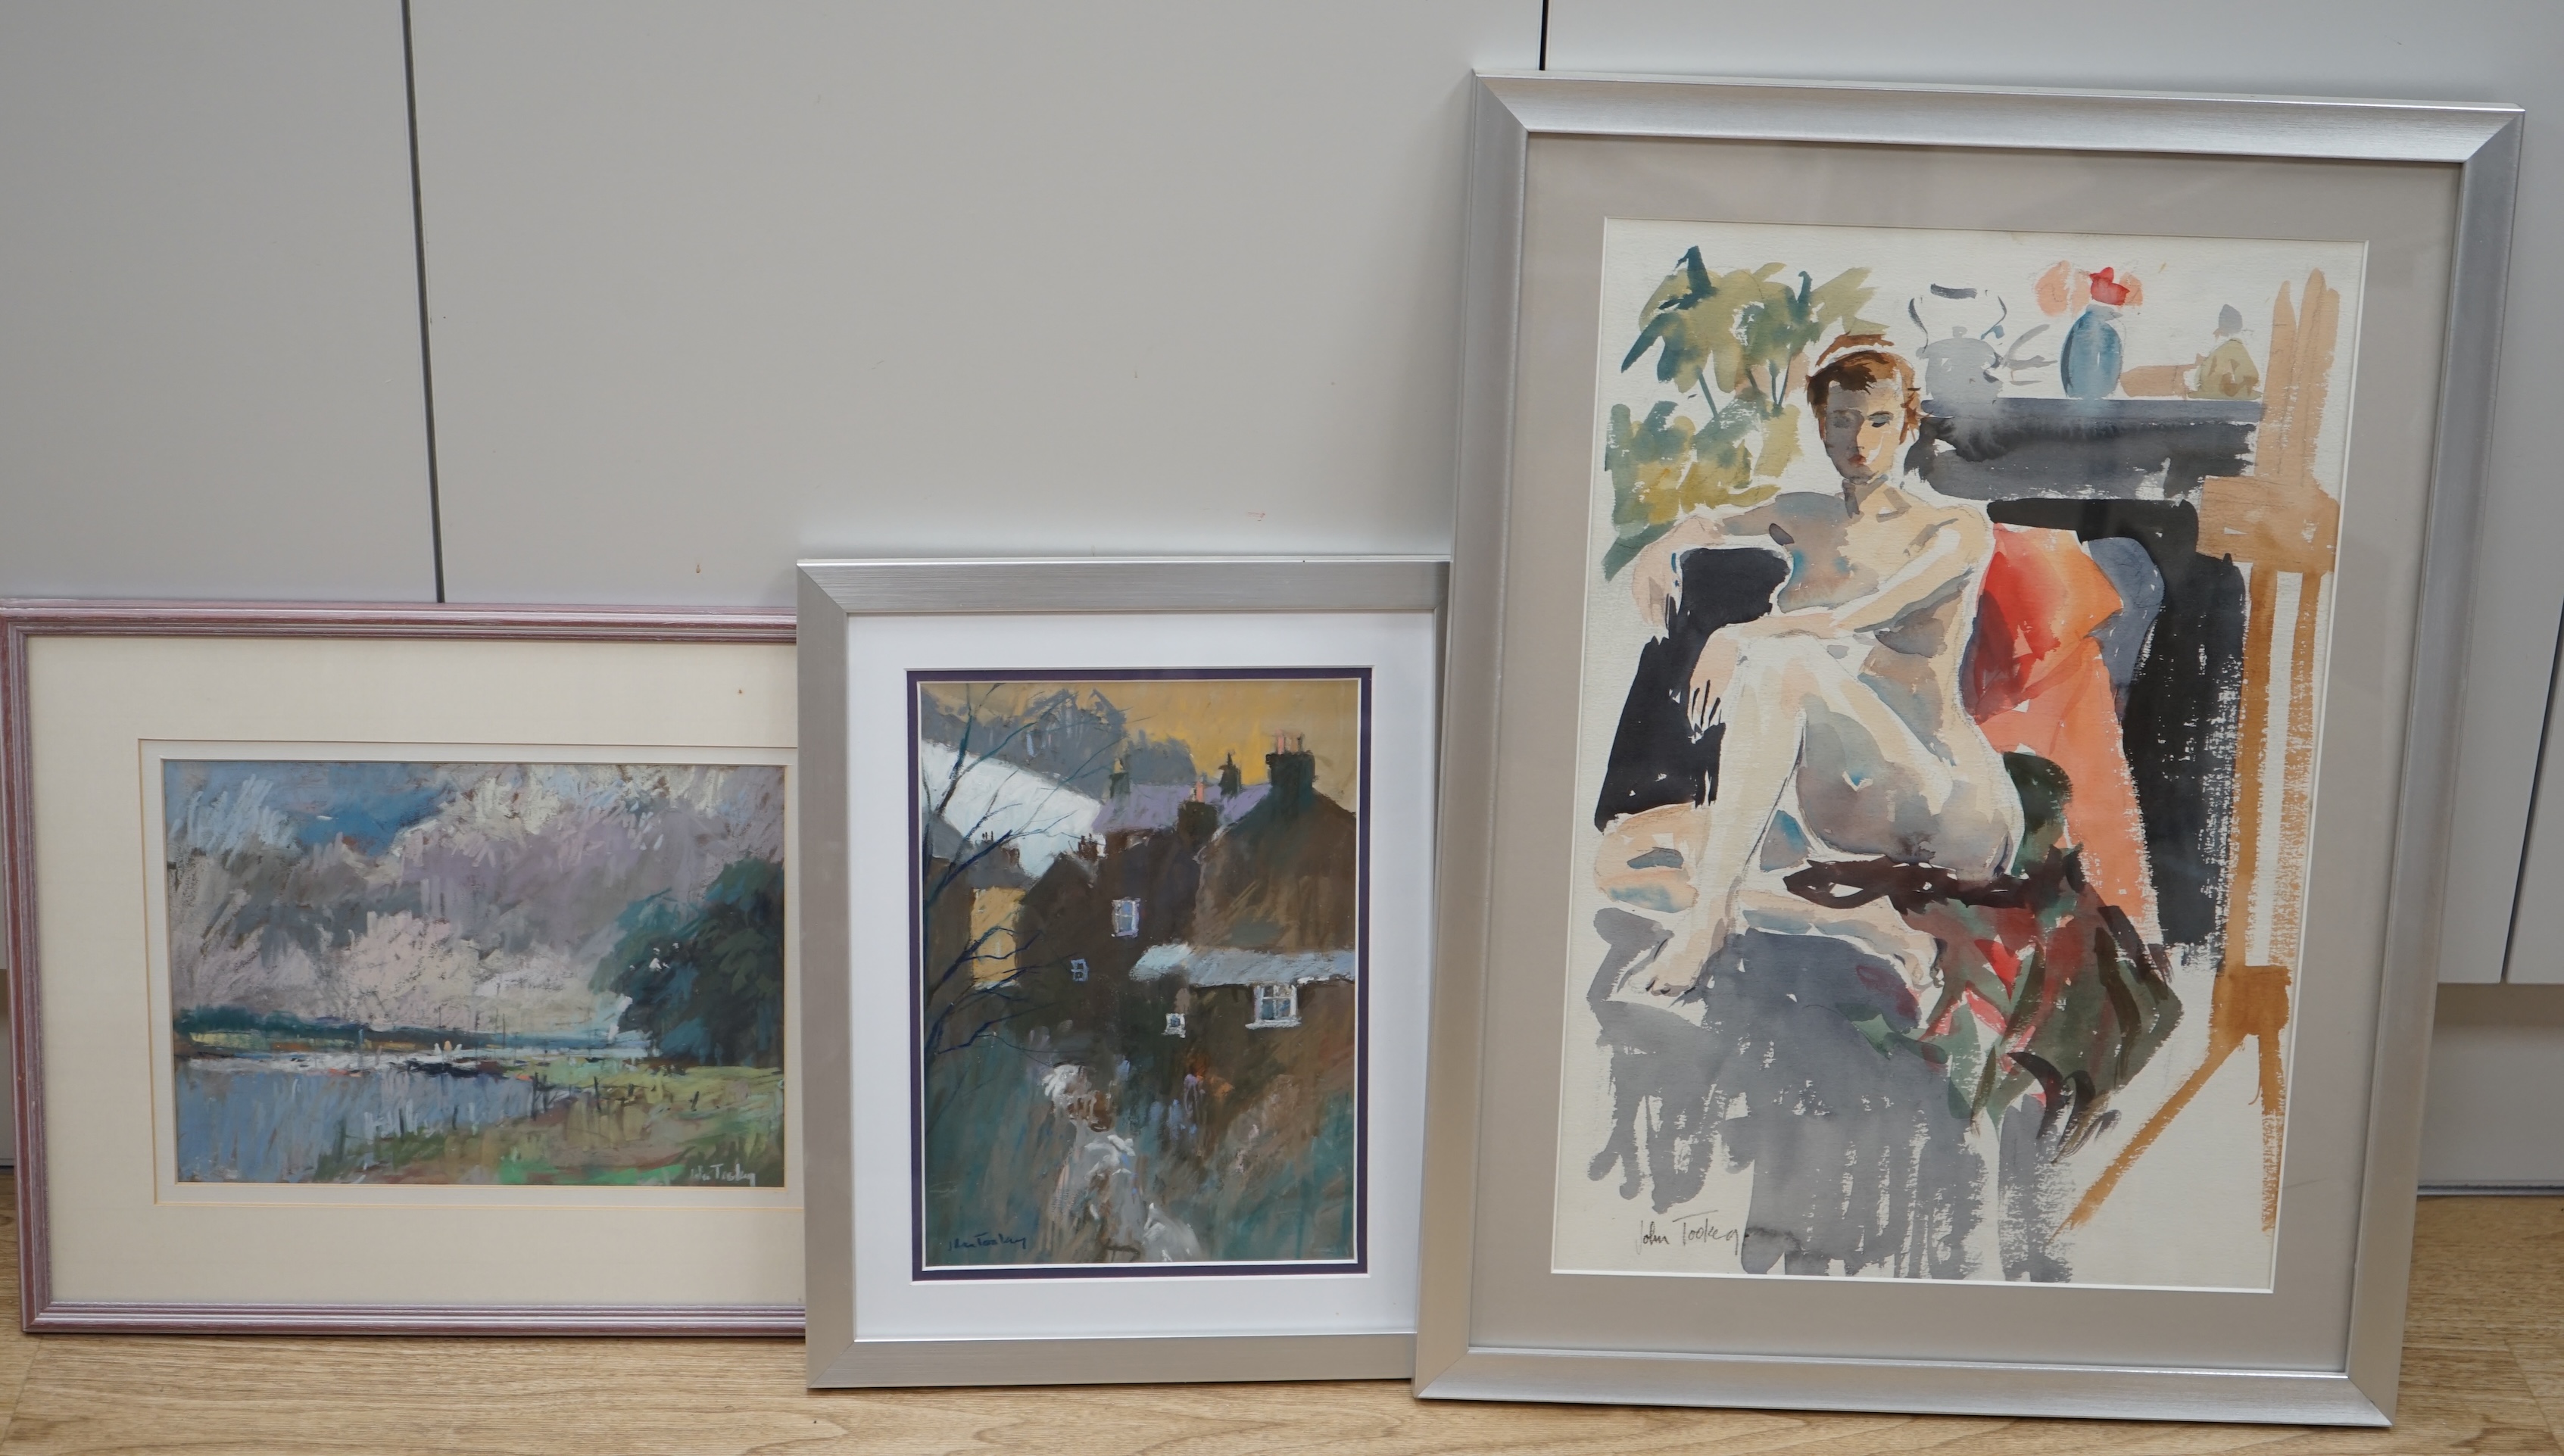 John Tookey (b.1947), two pastels, Landscapes, and a watercolour, Nude woman, each signed, 49 x 34cm. Condition - fair to good